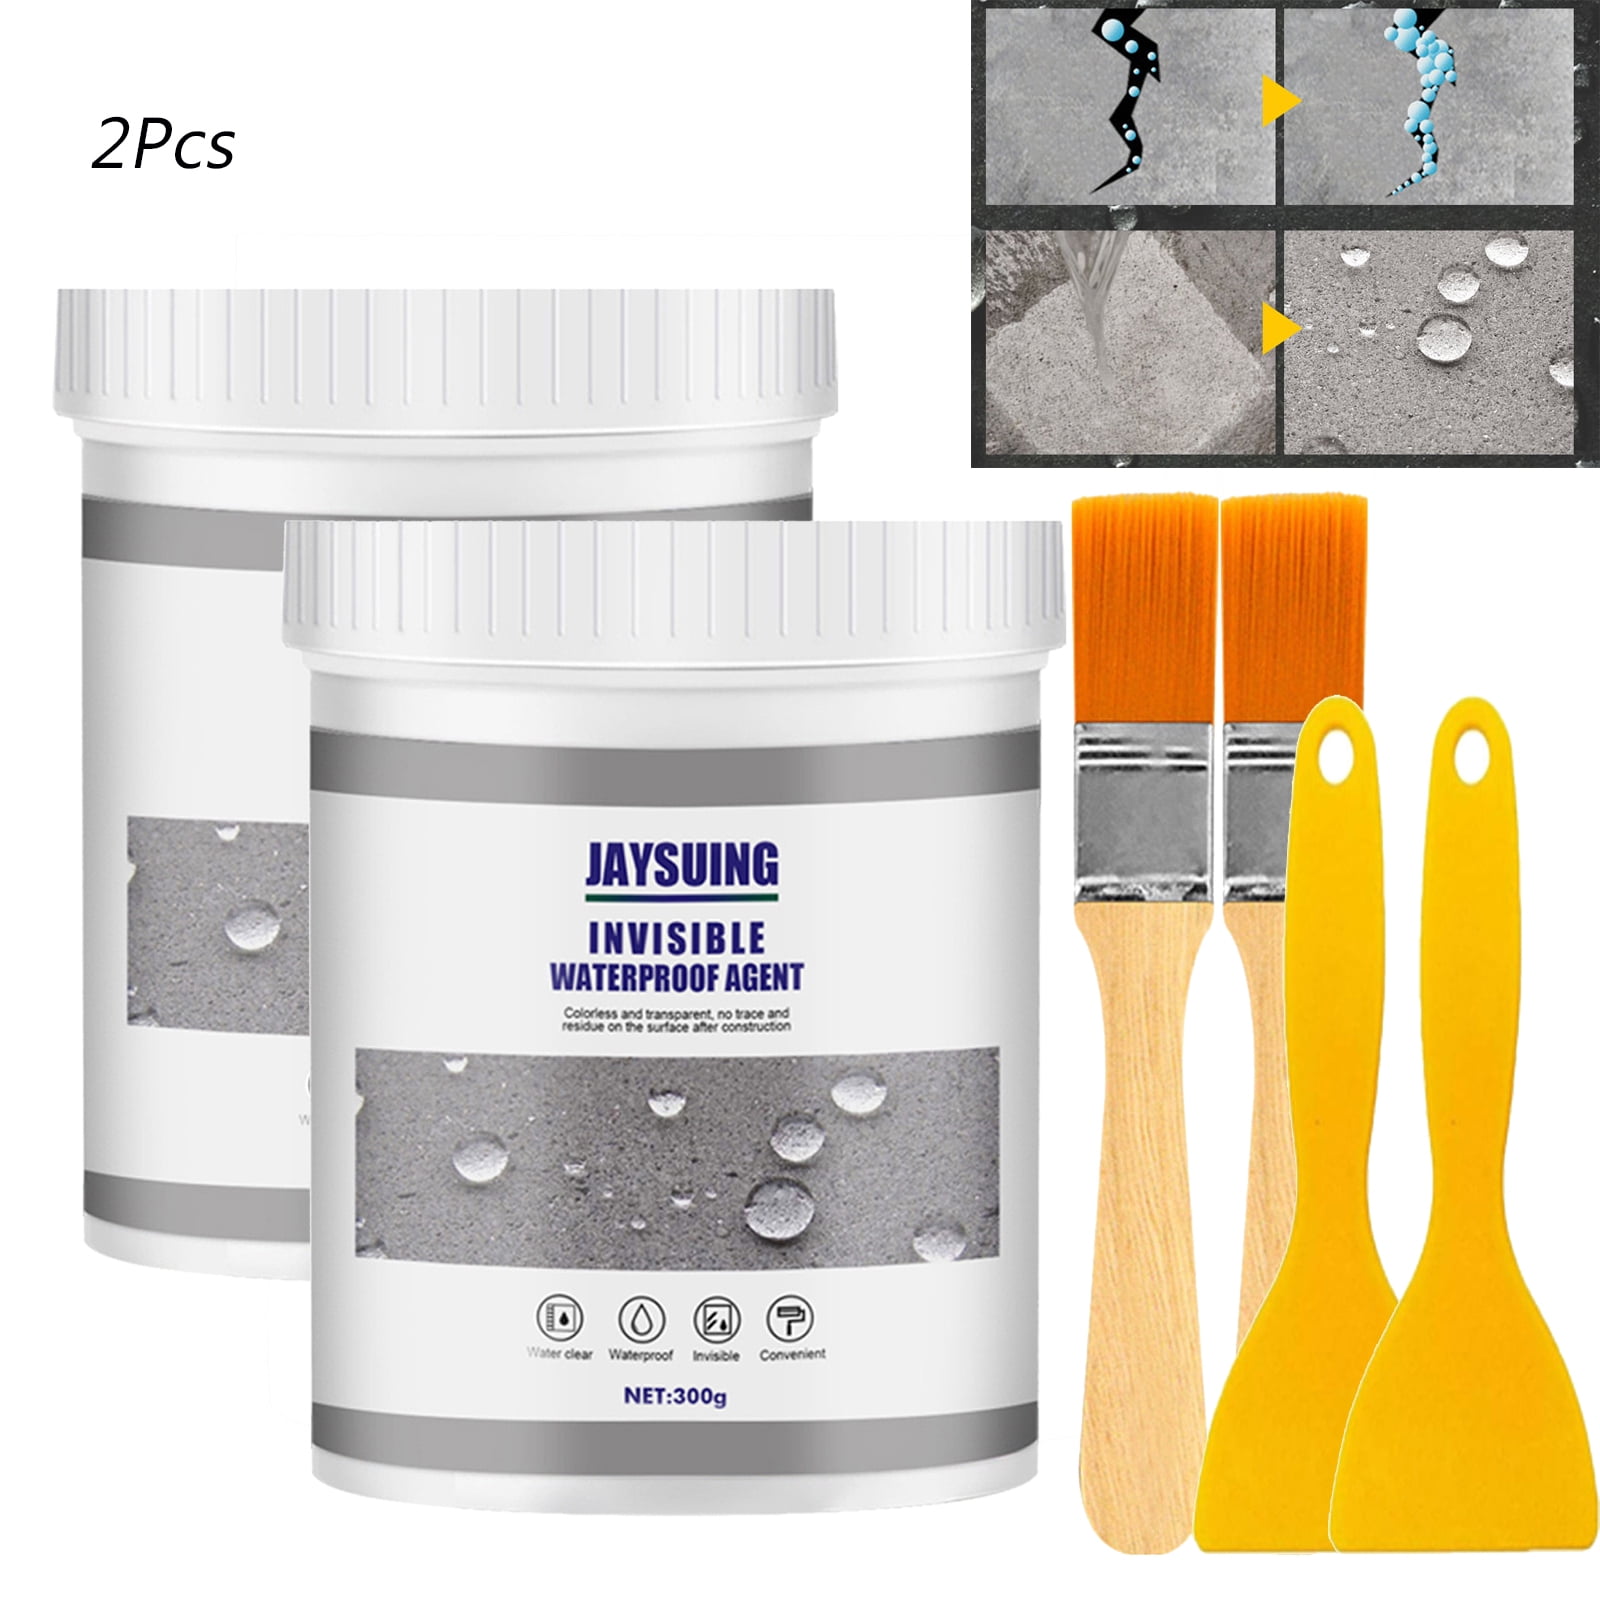 Jaysuing Invisible Waterproof Agent 10.5Fl Oz (300ml), Transparent  Waterproof Coating Waterproof Glue - Waterproof Sealant, Super Strong Invisible  Waterproof Anti-Leakage Agent 